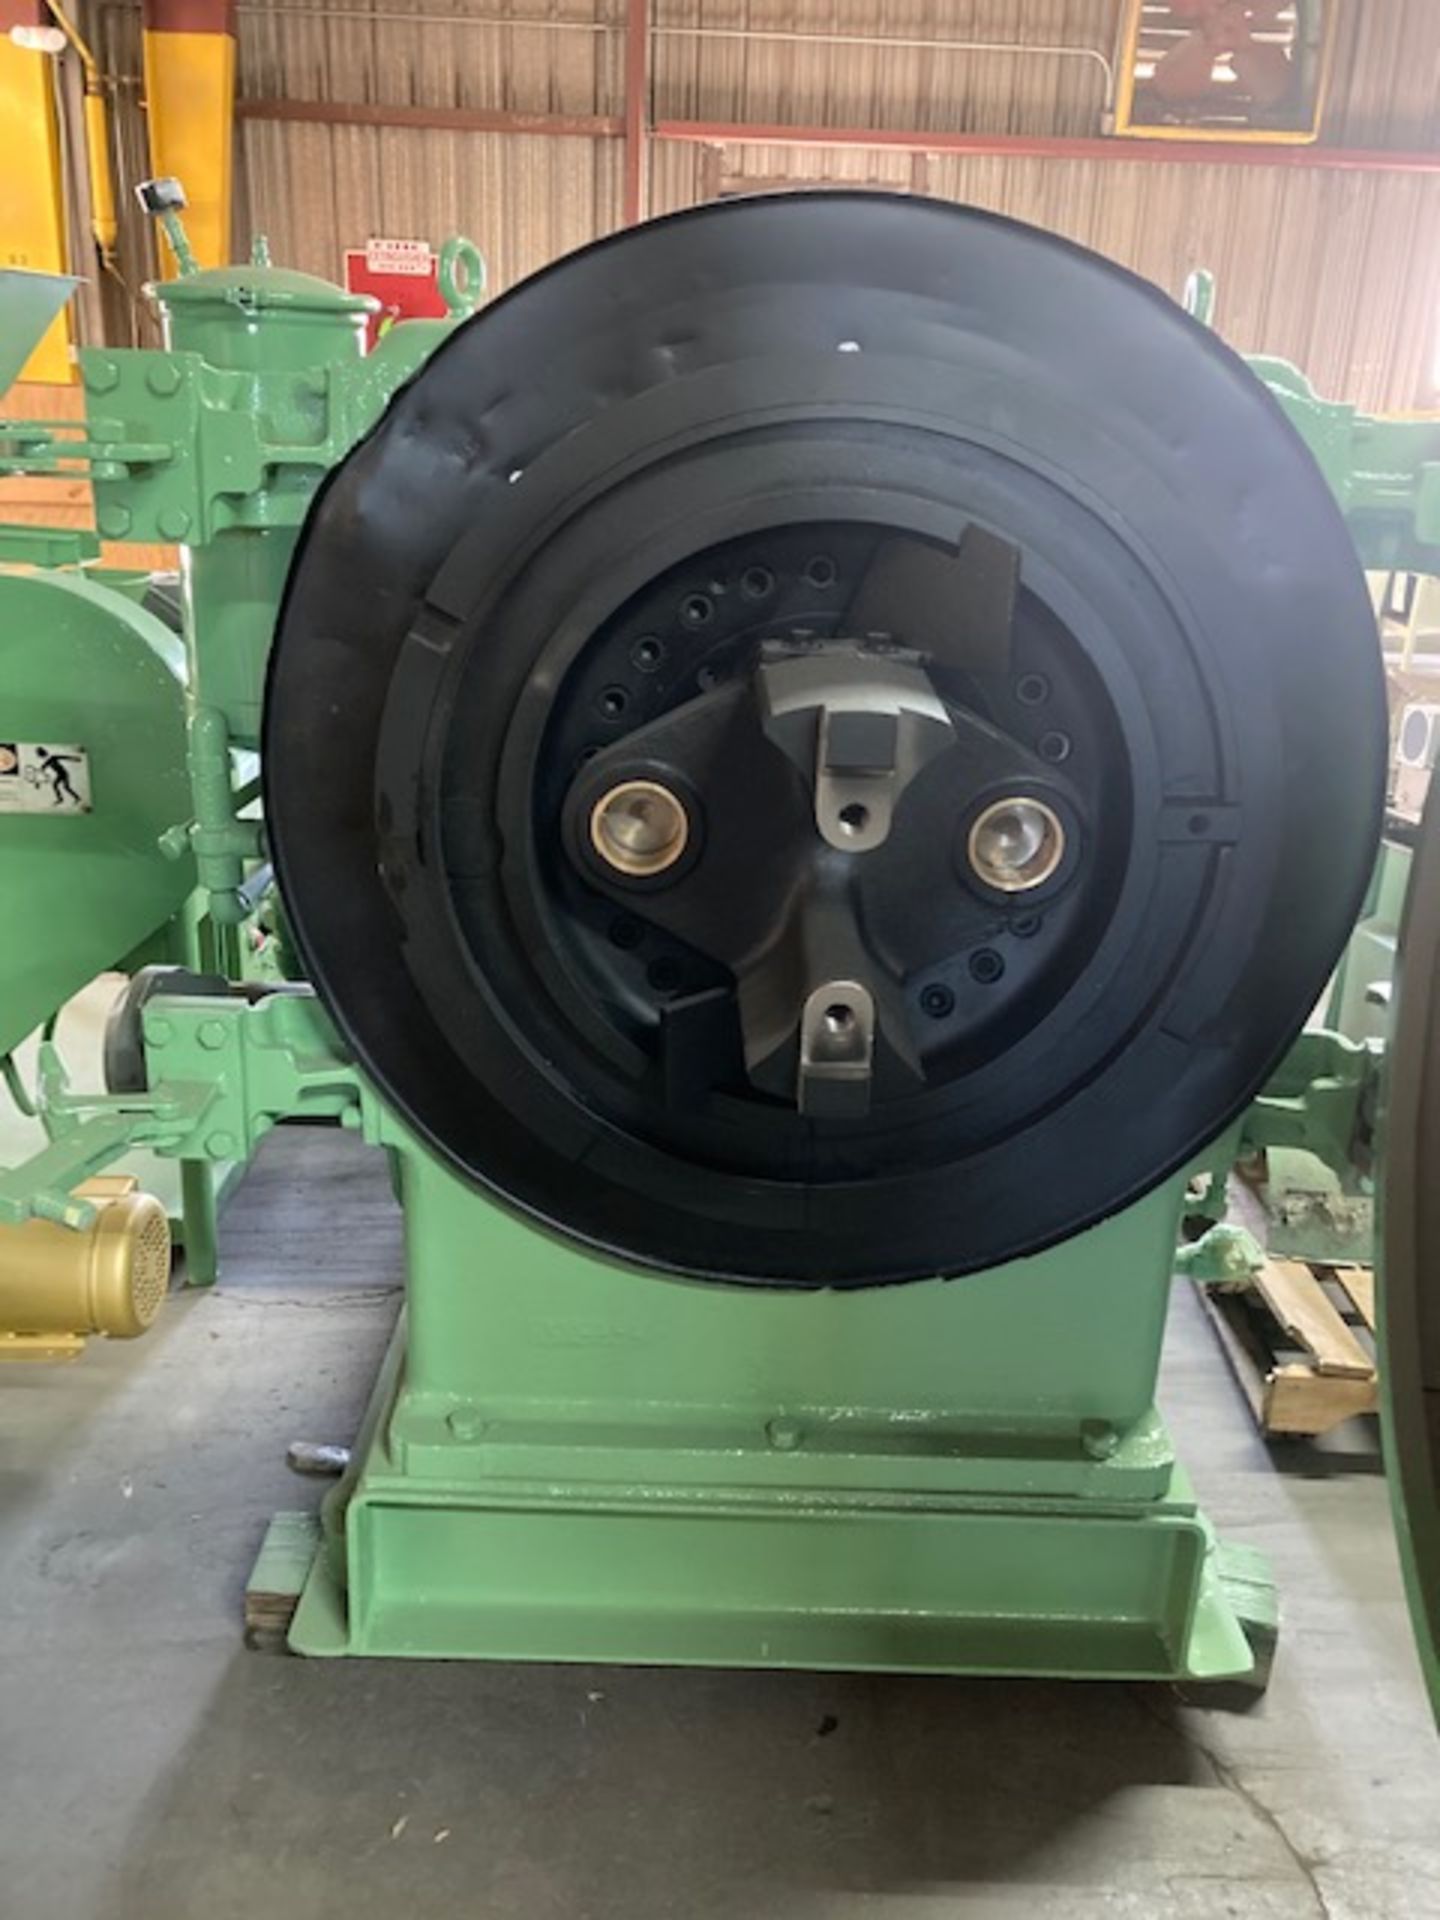 Located in Canon City CO: Rebuilt CPM 7000 pellet mill with new bearings, good gears, mainshaft, - Image 3 of 3